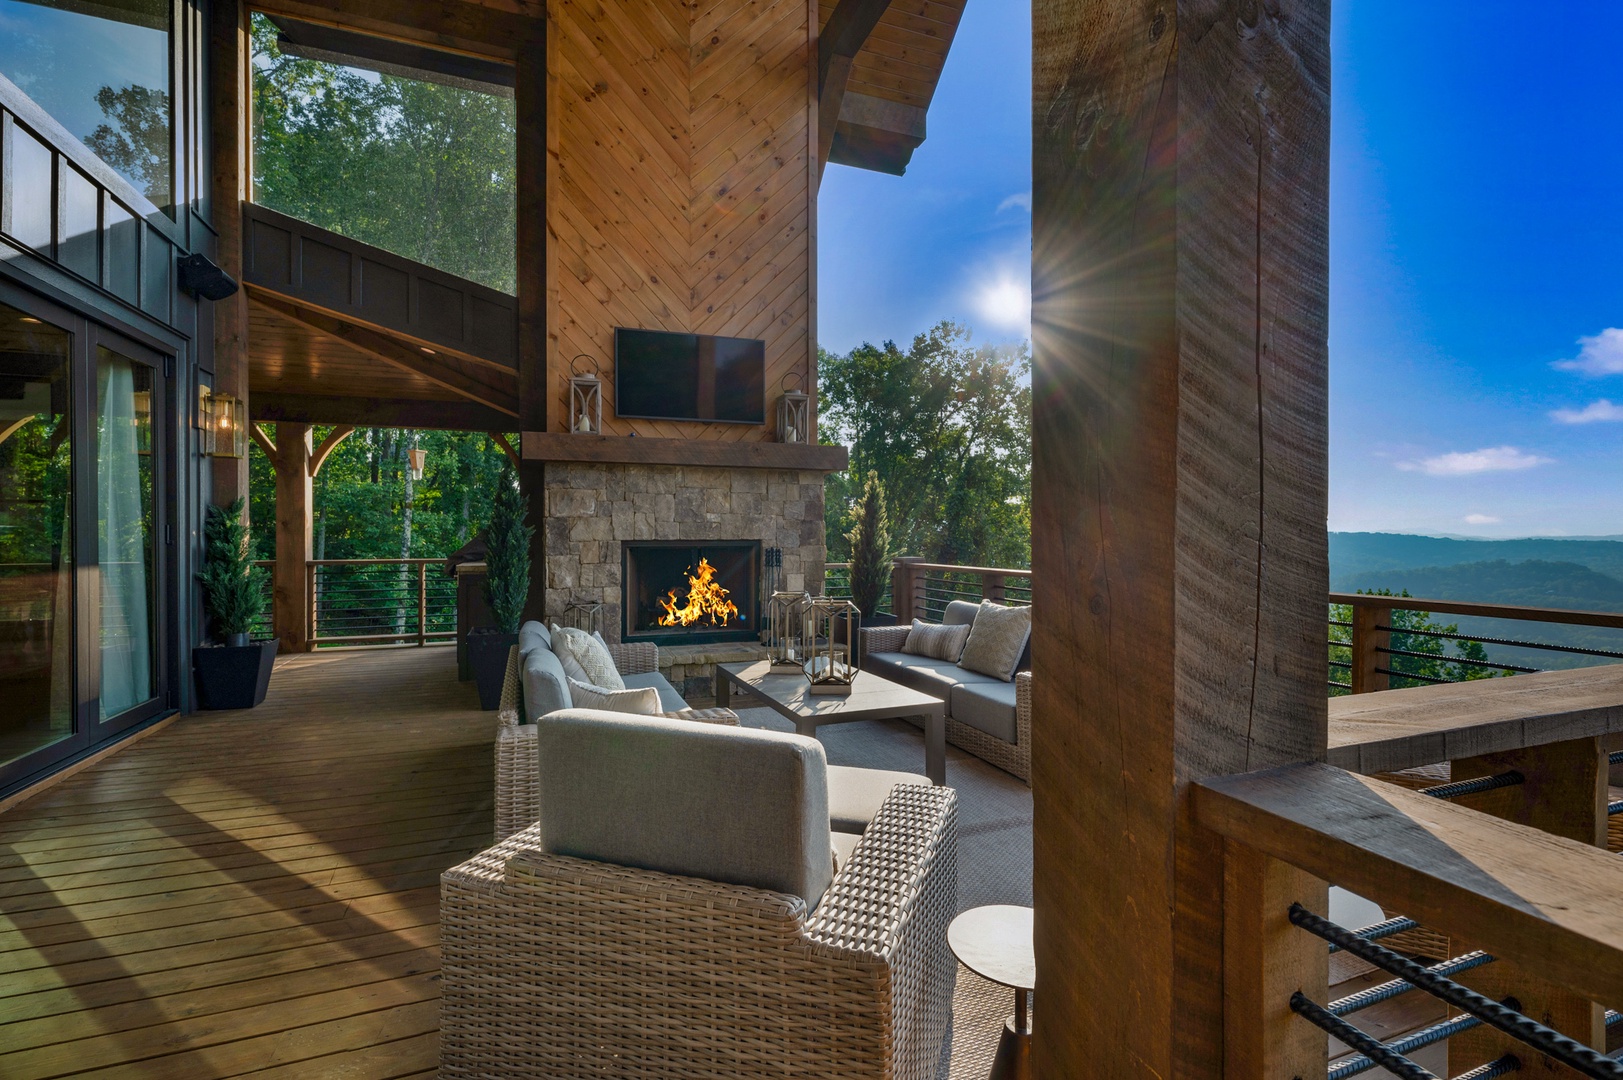 The Sanctuary: Entry Level Deck's Fireplace Seating